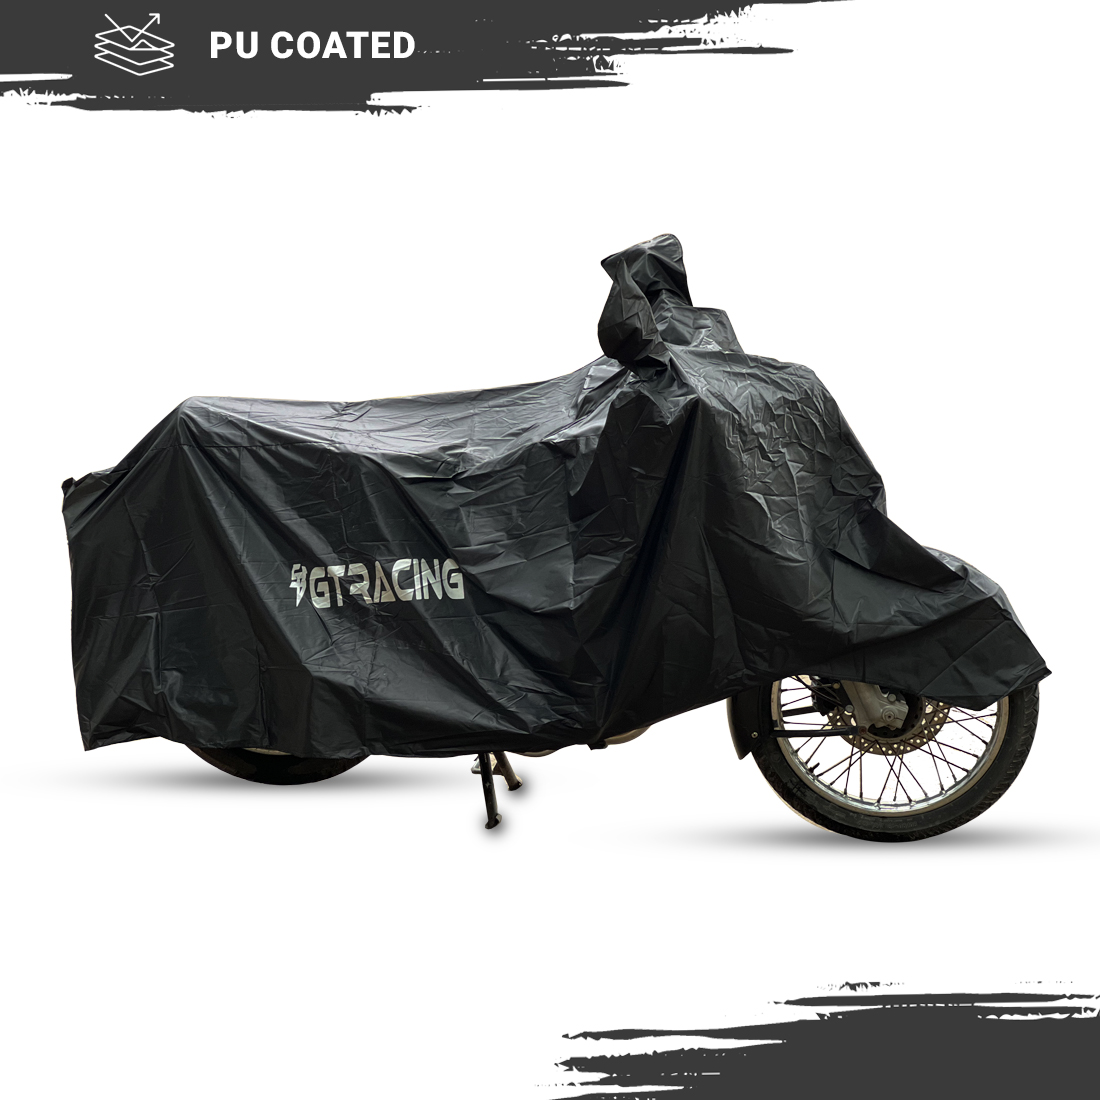 Steelbird 100% Waterproof Bike Cover GT Racing UV Protection Water-Resistant & Dustproof (Black PVC), Bike Body Cover With Carry Bag (All Scooter Activa Electric Scooty Size)